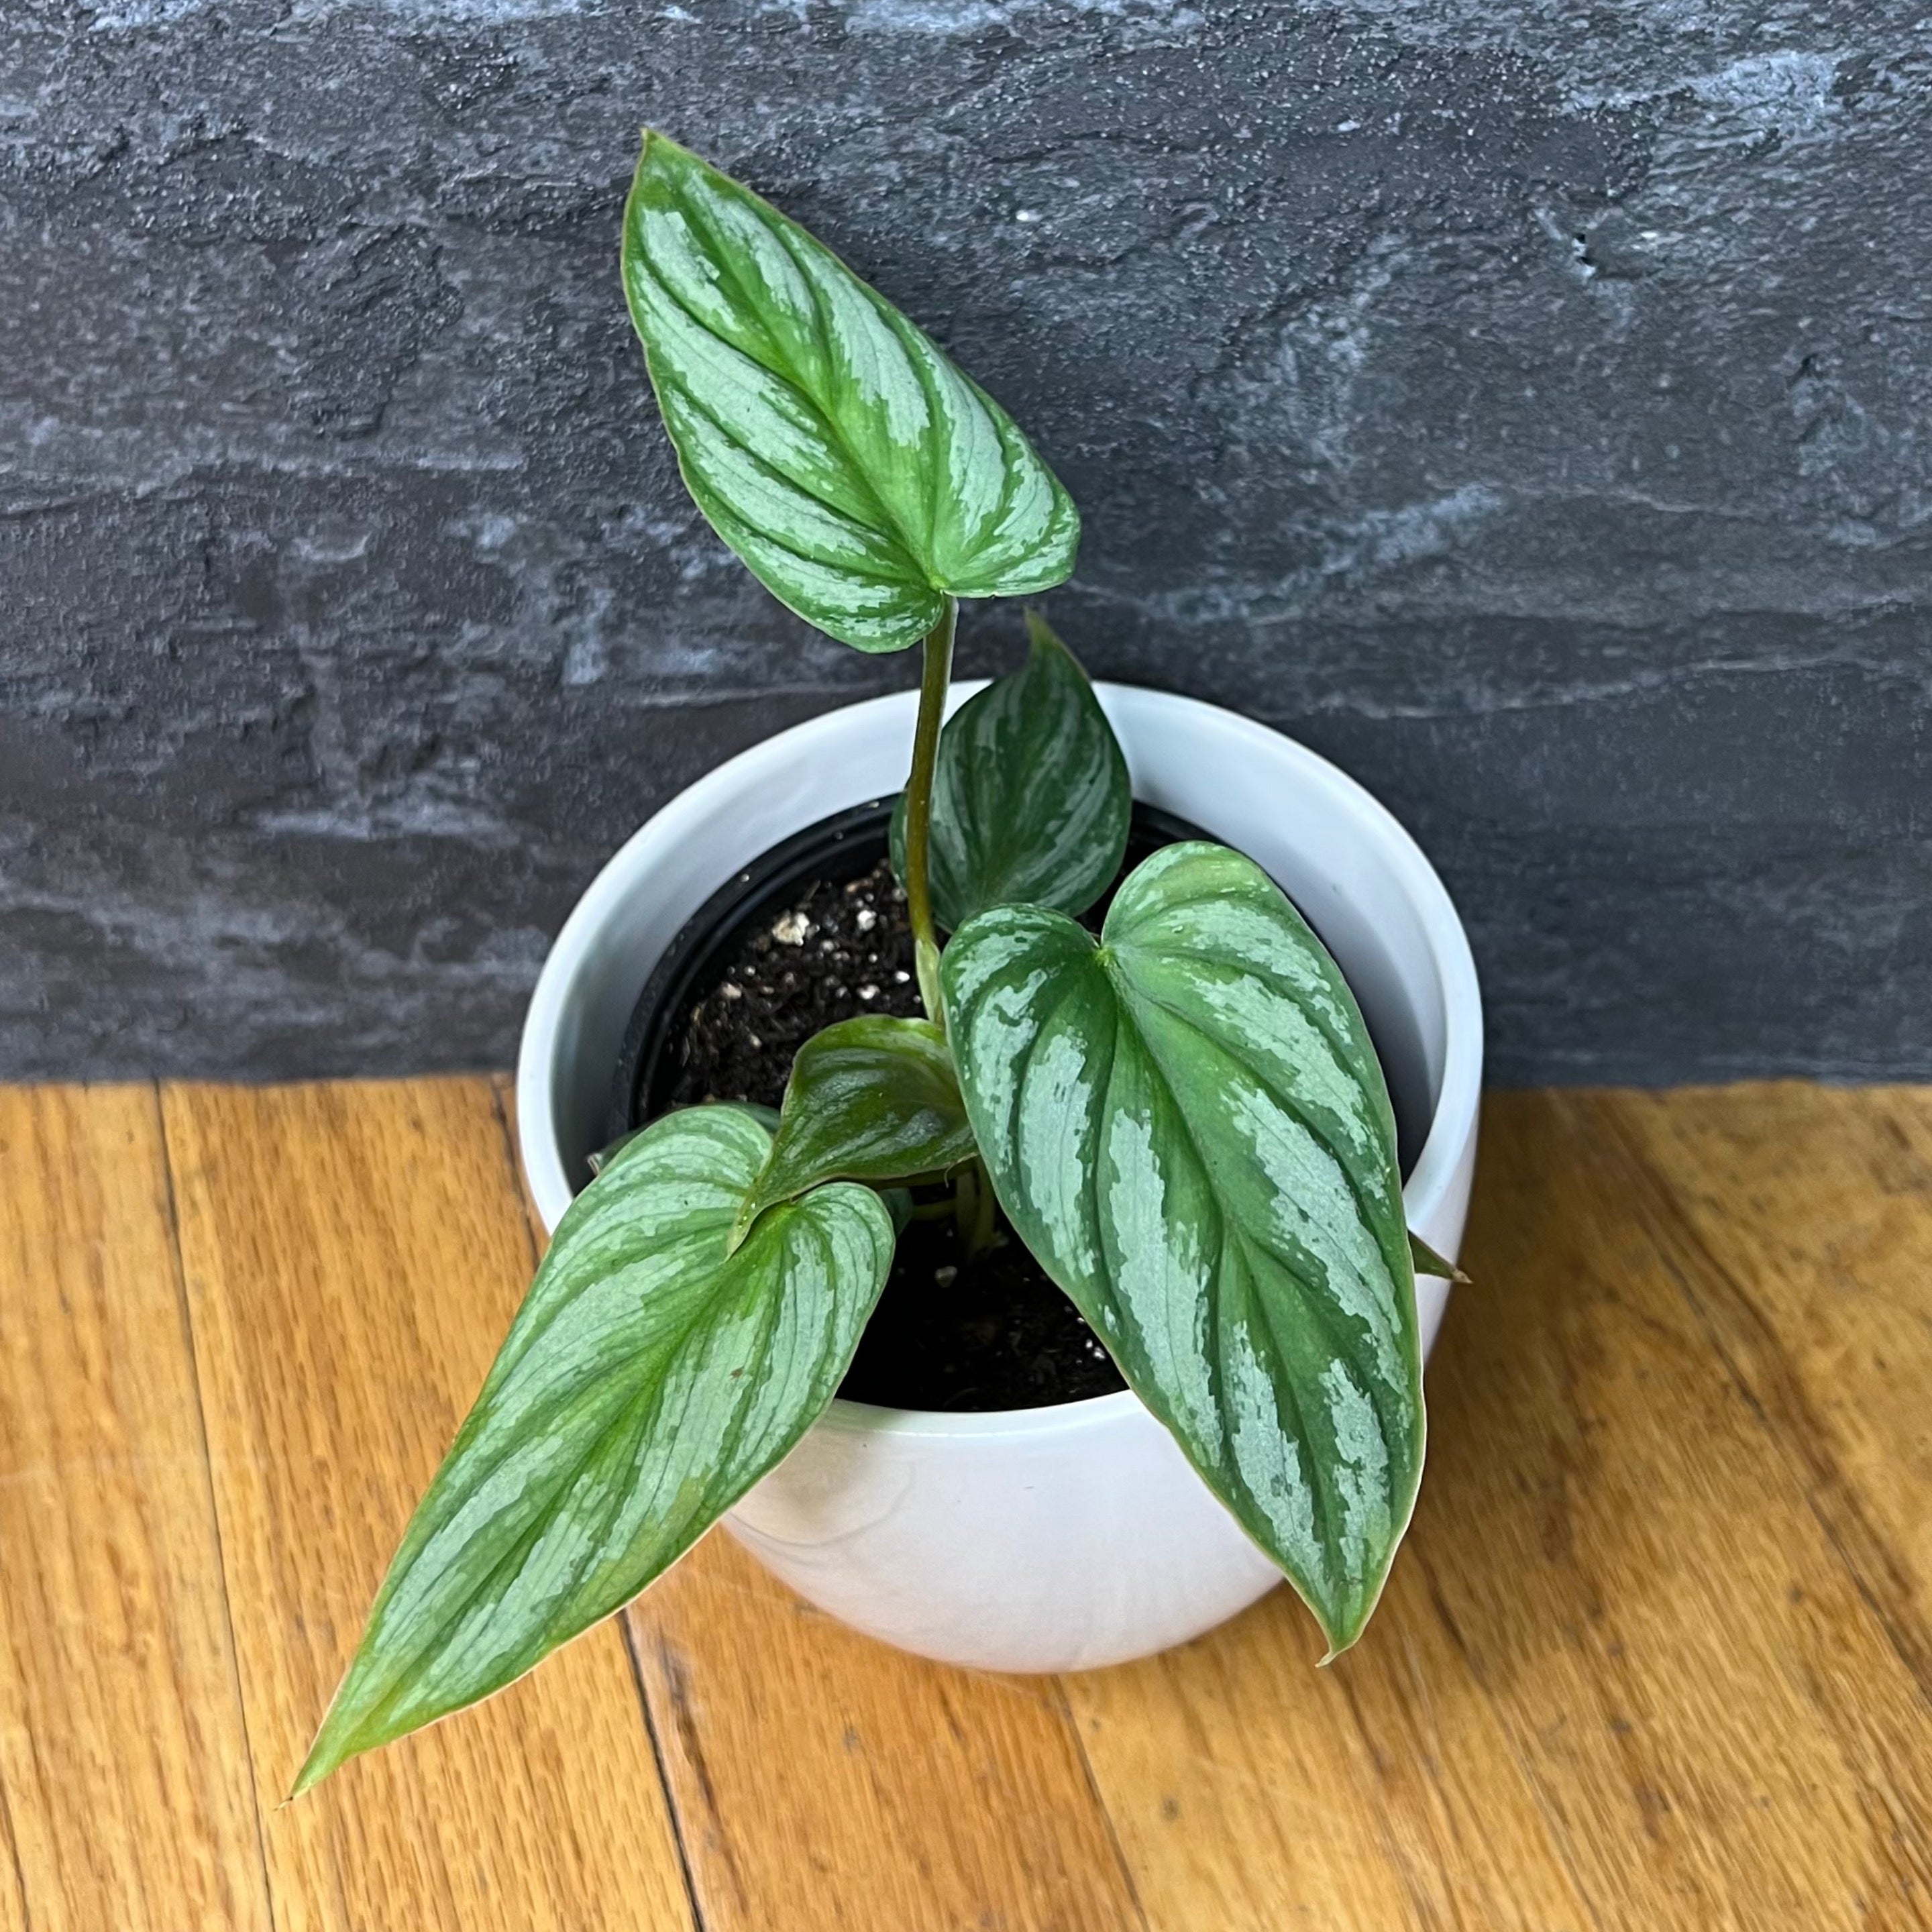 Philodendron Mamei Silver